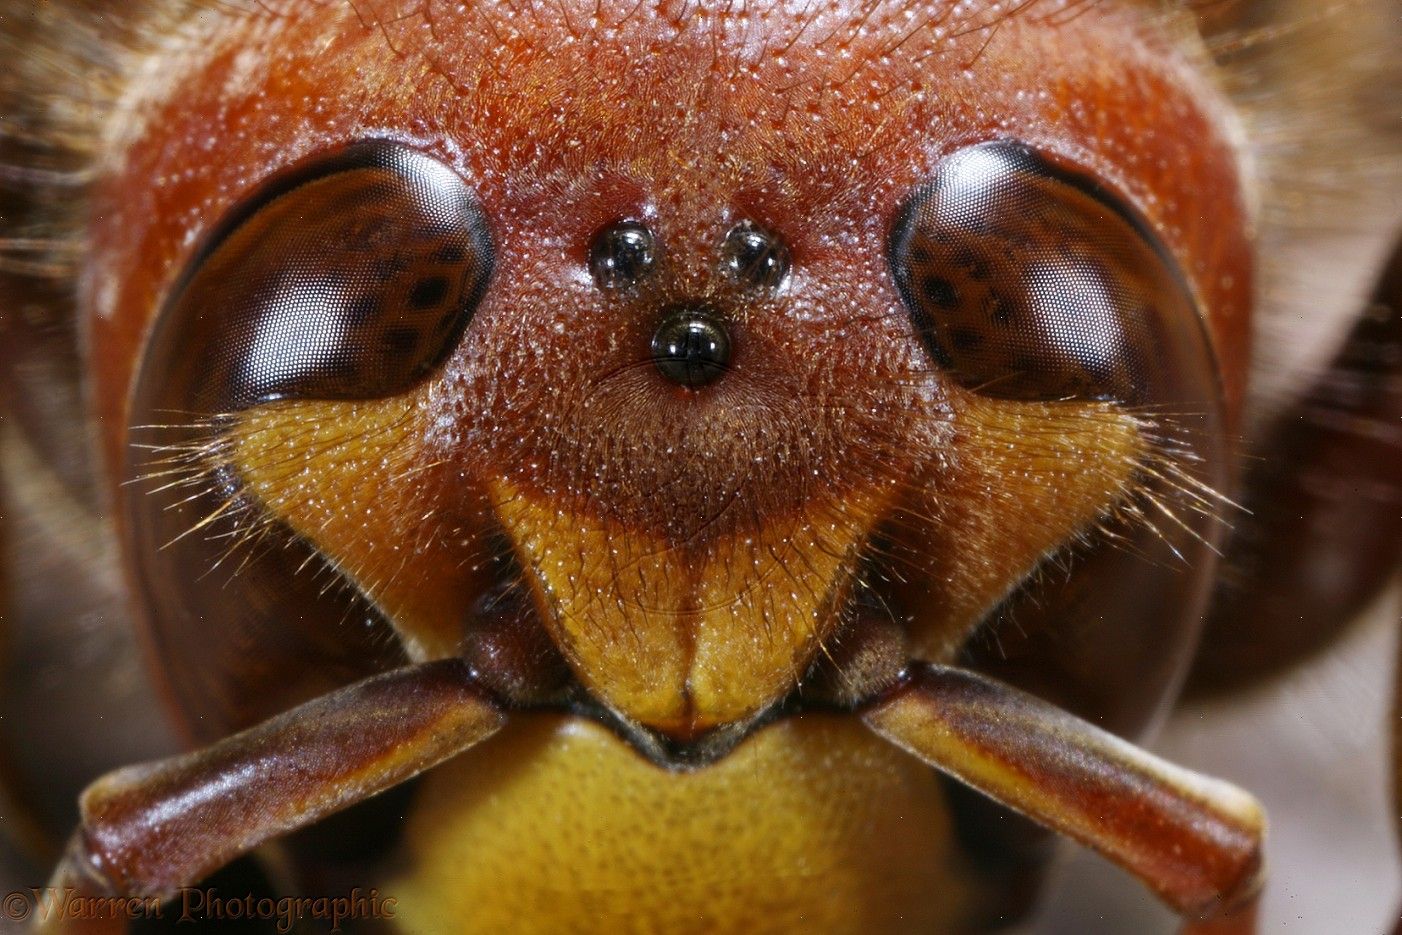 What kind of eyes do bees have?